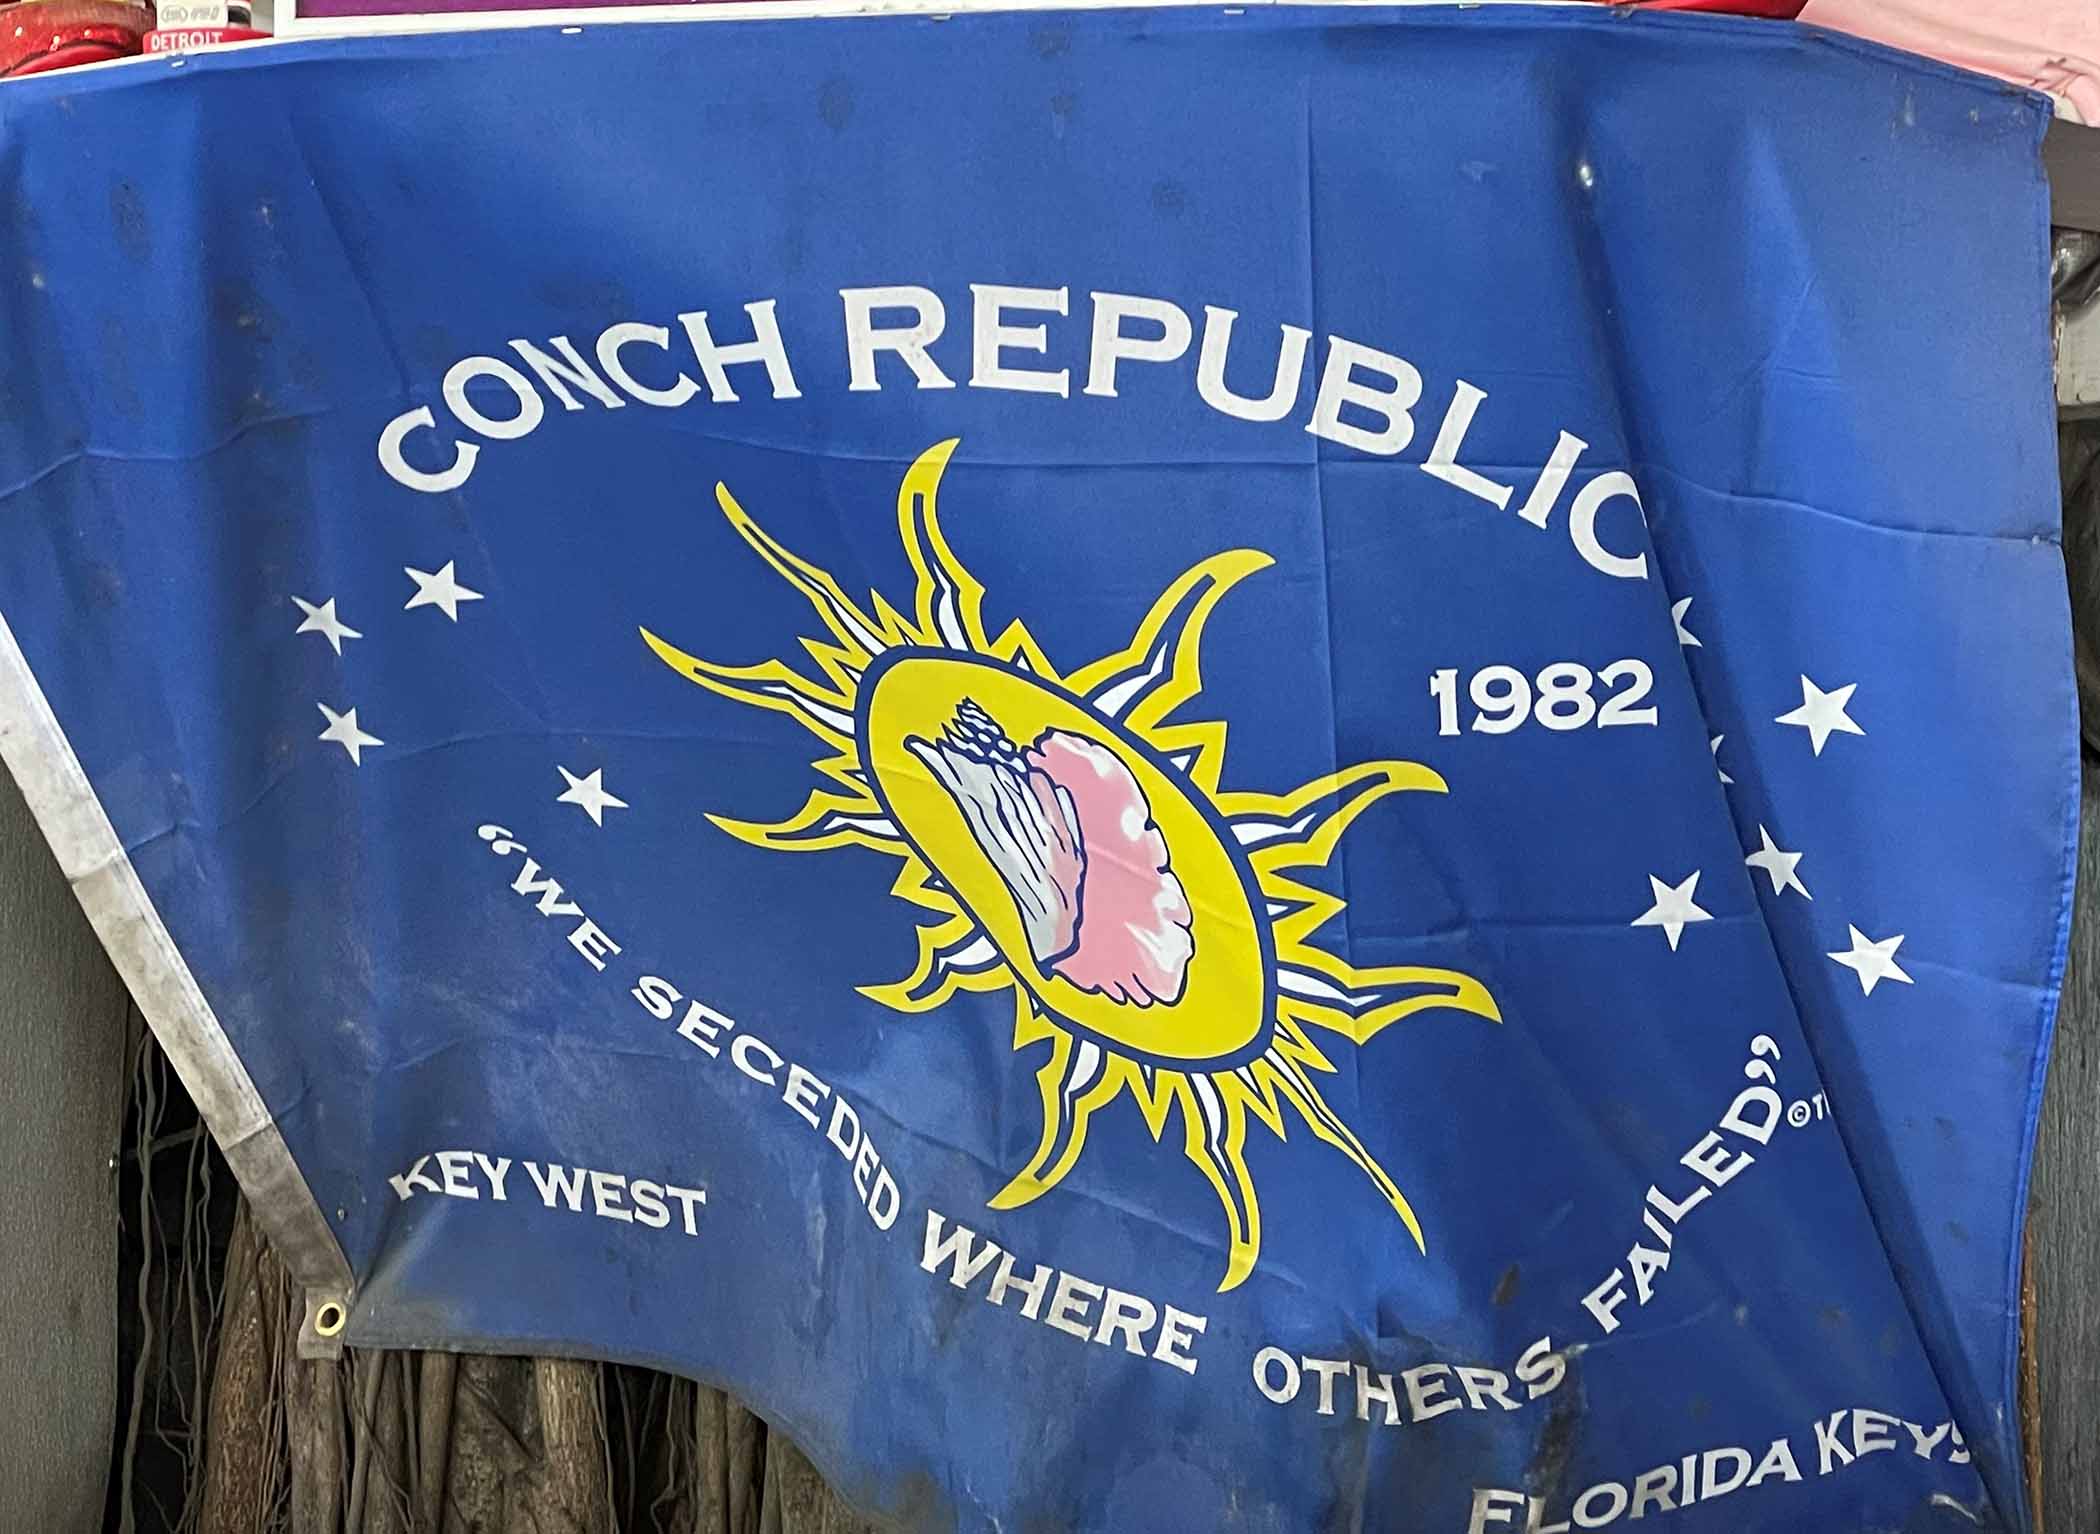 WELCOME TO THE CONCH REPUBLIC! KEY WEST